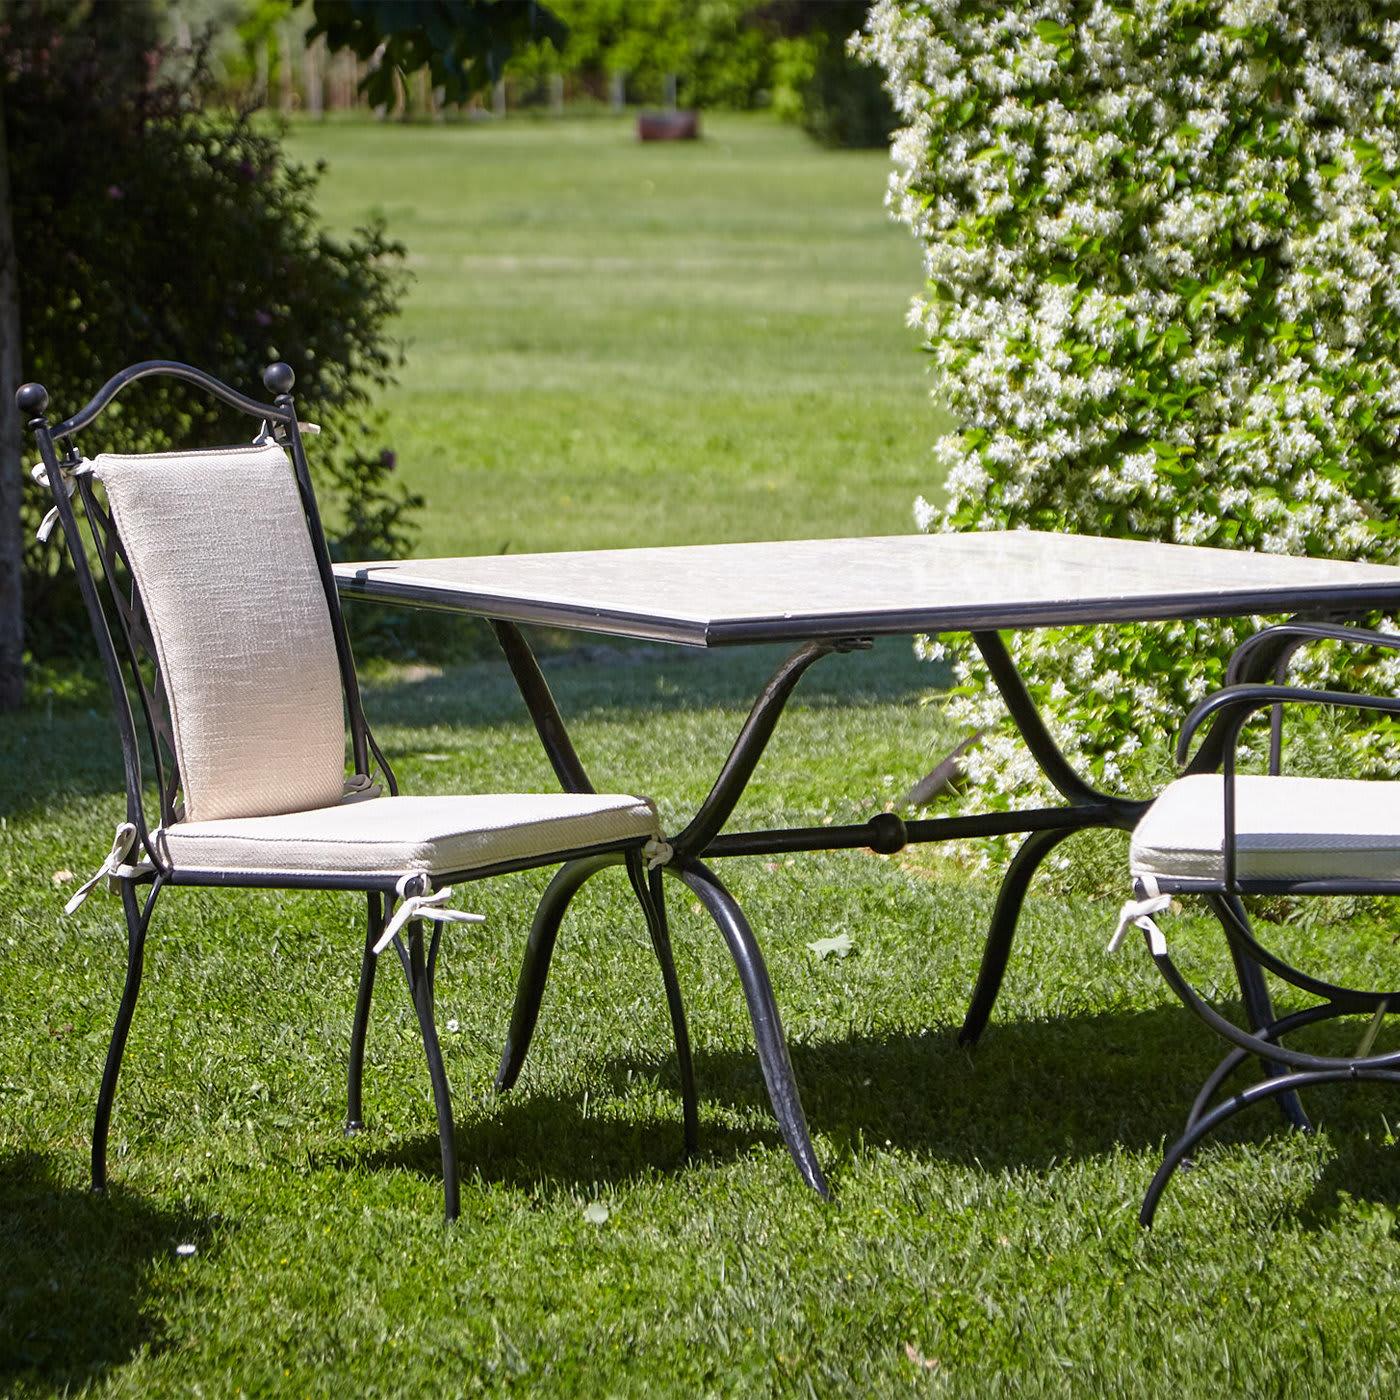 A modern take on a timeless favorite, the Rombo Chair channels traditional Parson flair and combines it with a galvanized, powder-coated stainless steel design that is perfect both indoors and outdoors. Elegant, comfortable, and durable, this